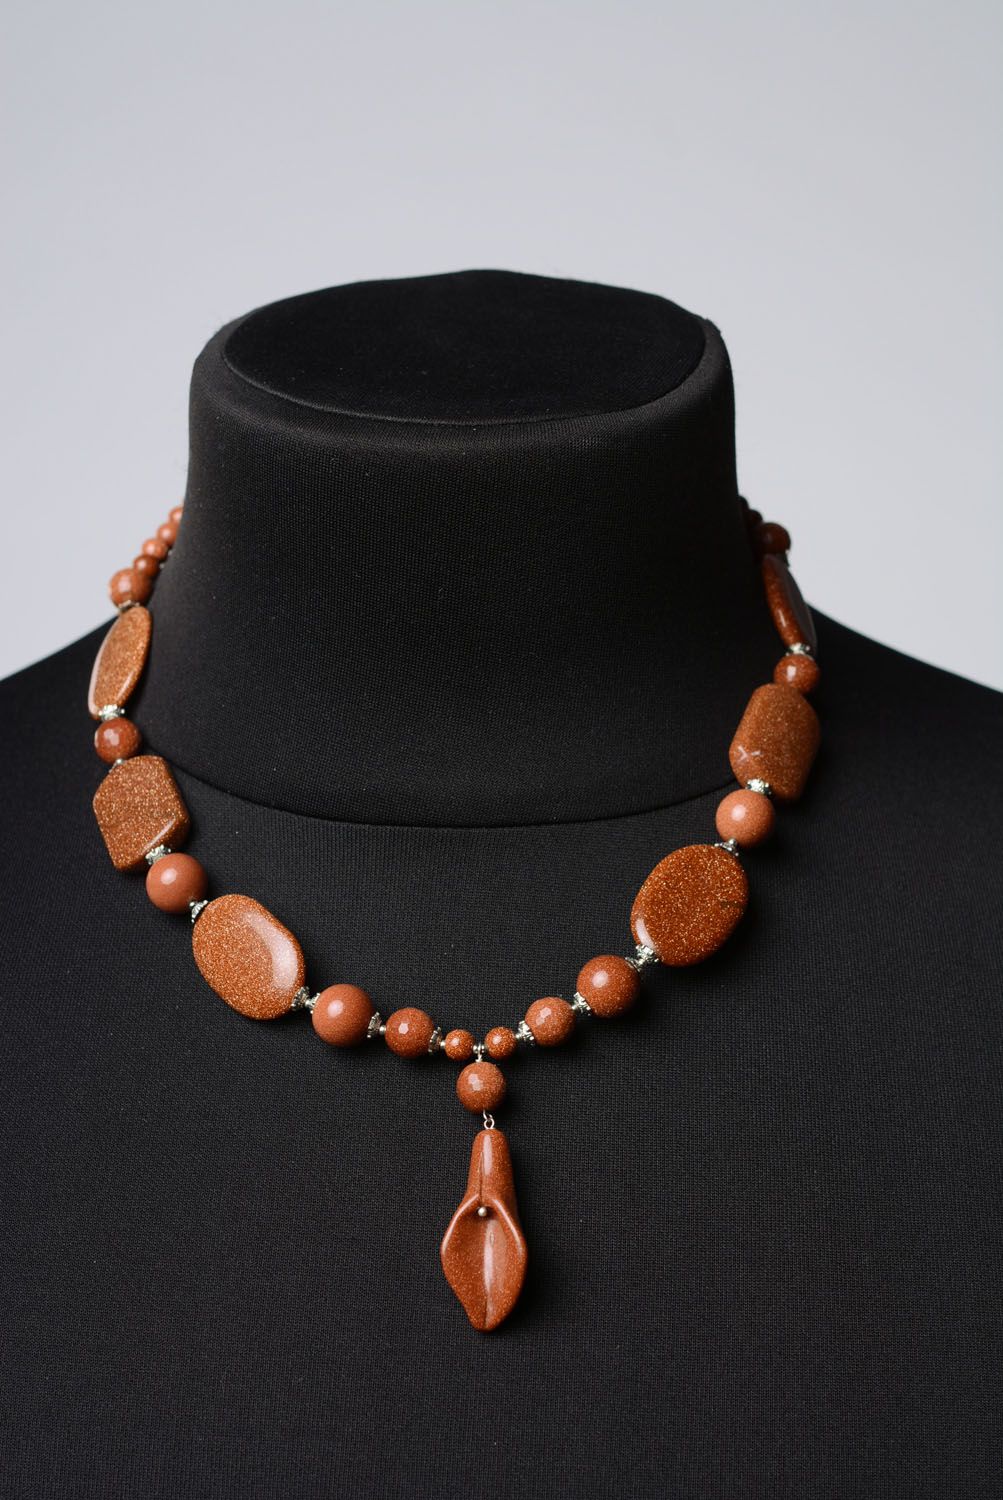 Necklace made of natural stone photo 2